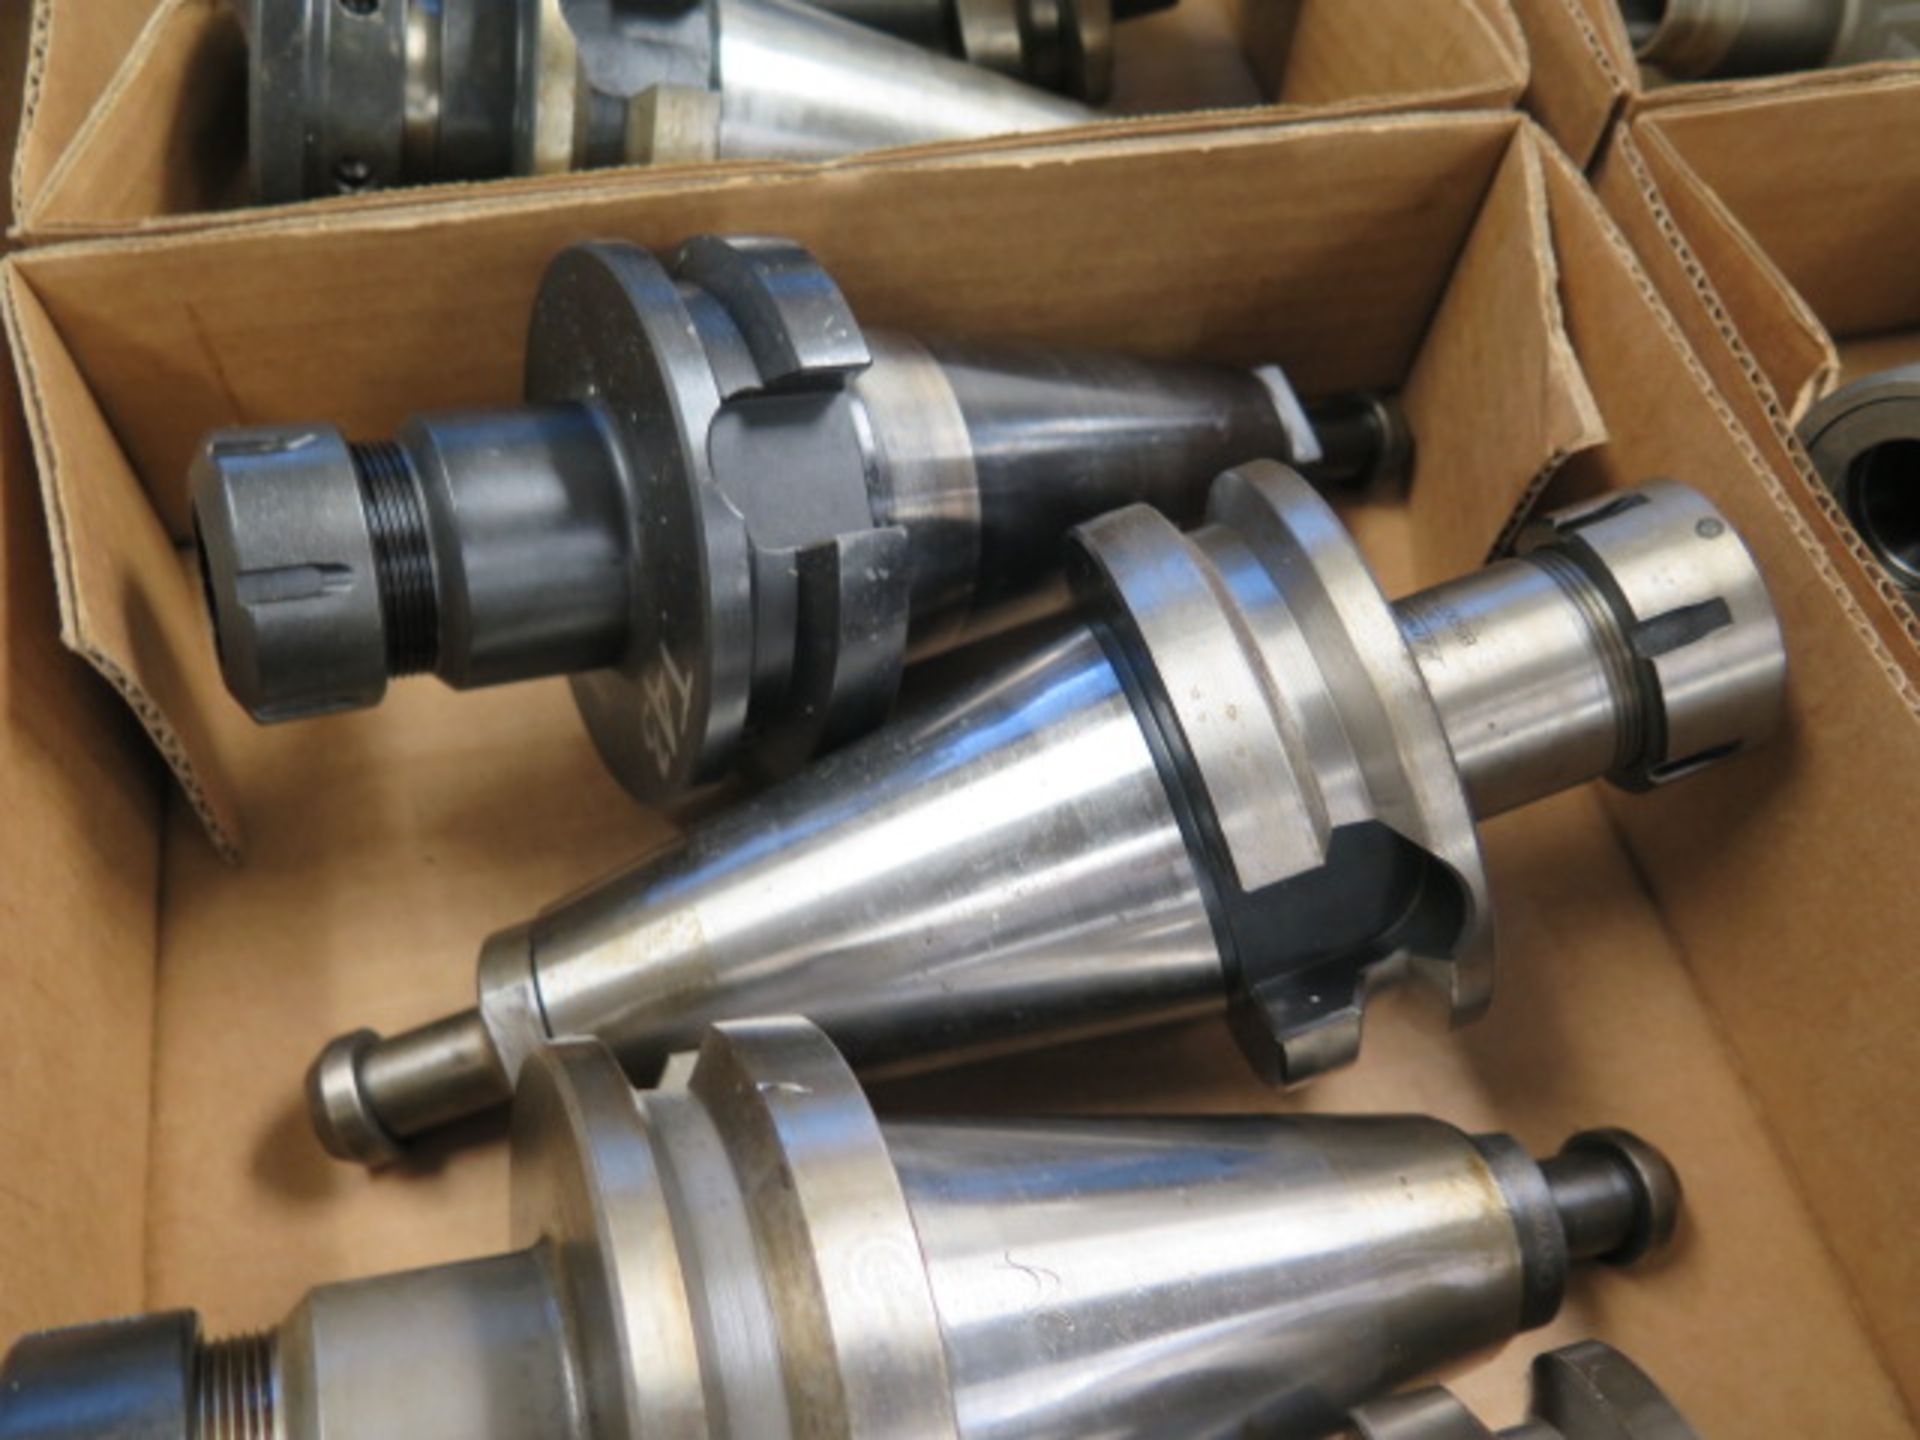 BT-50 Taper ER32 Collet Chucks (5) (SOLD AS-IS - NO WARRANTY) (Located @ 2229 Ringwood Ave. San Jose - Image 2 of 4